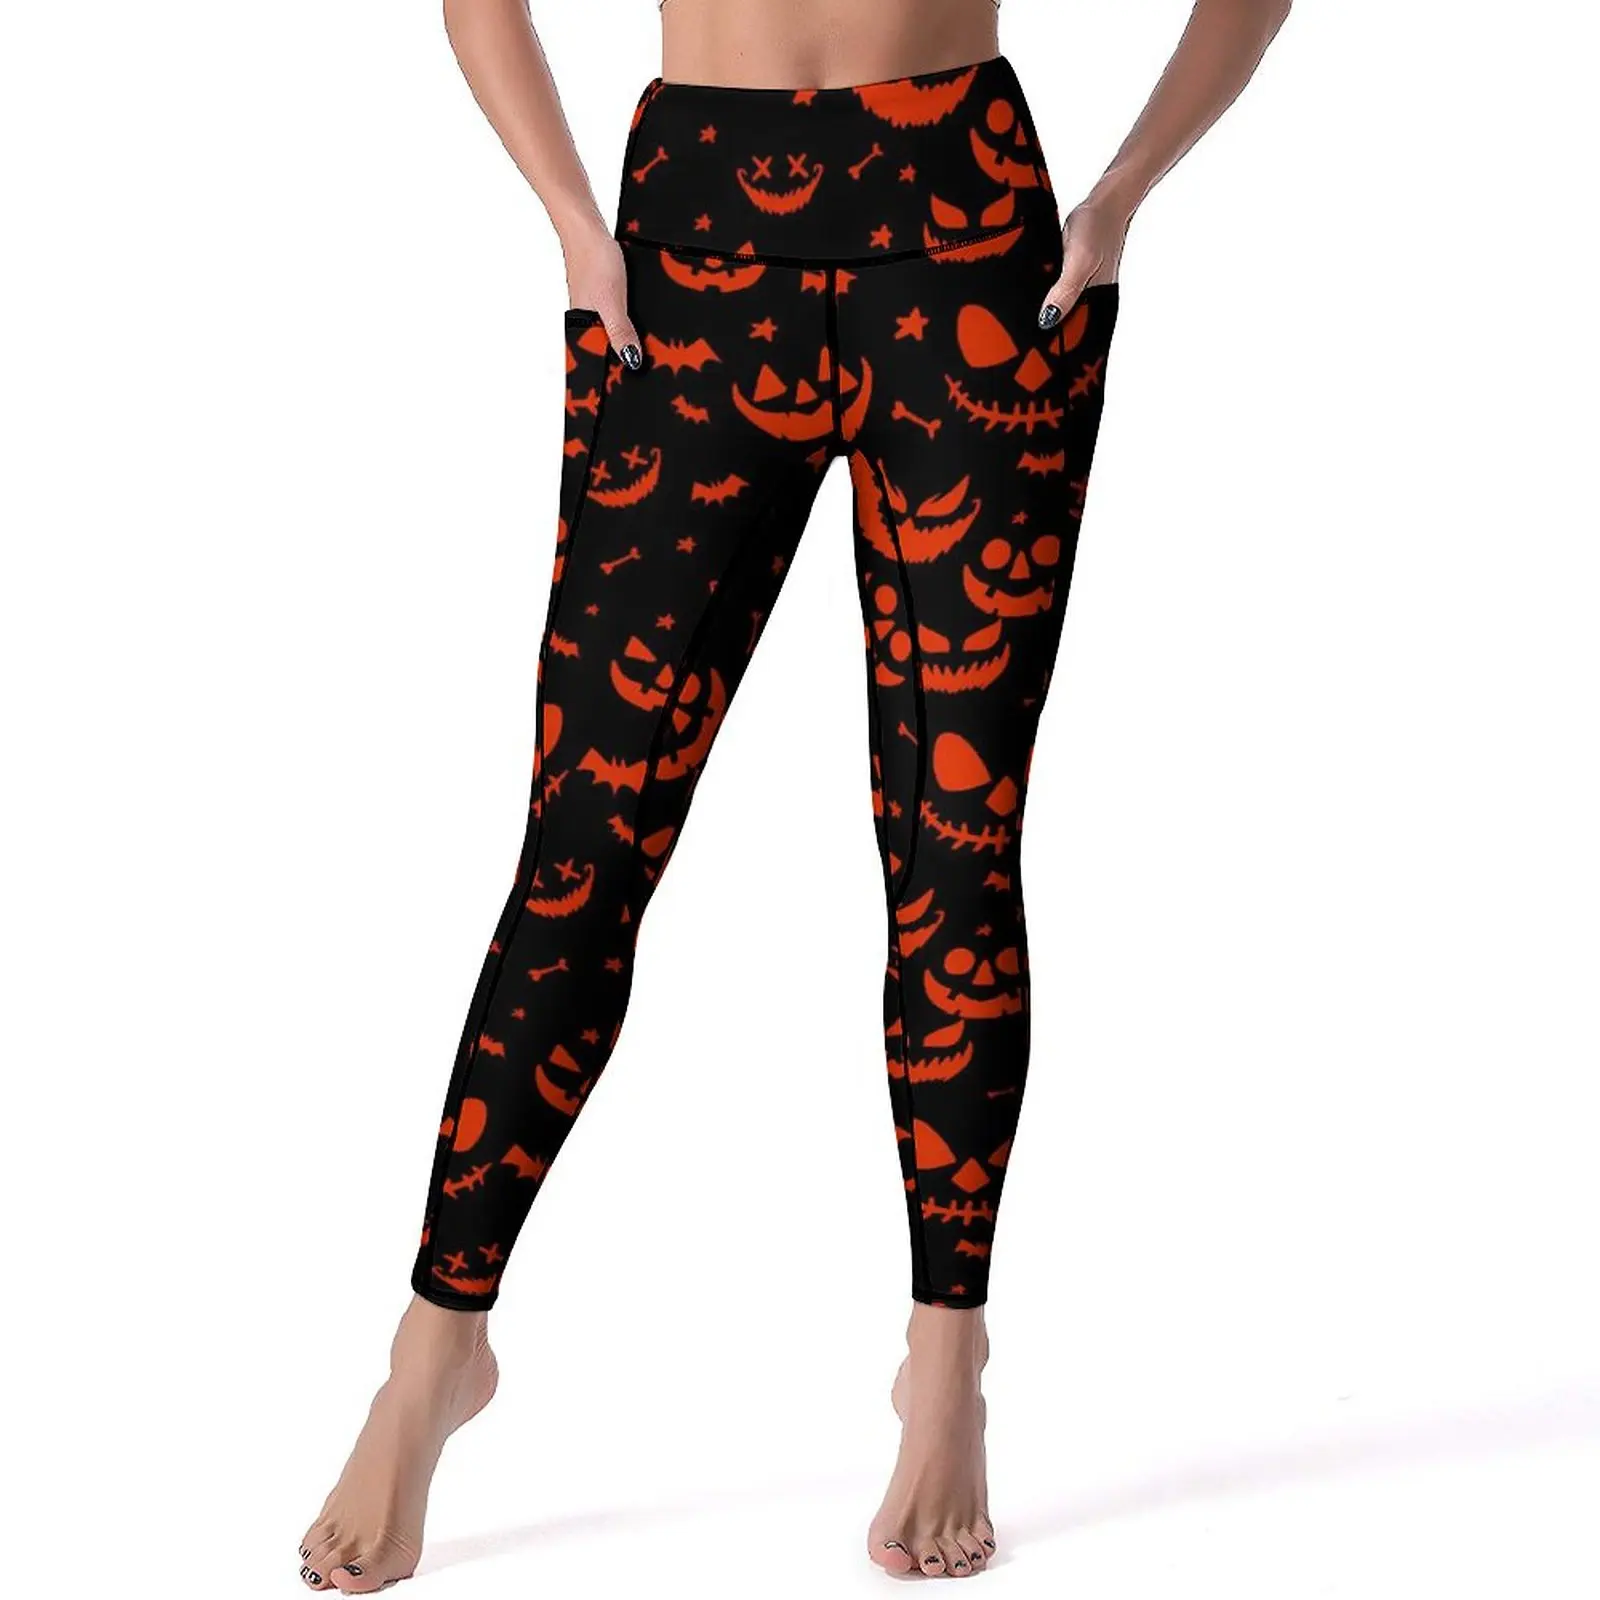 

Orange Pumpkin Leggings Sexy Spooky Halloween Gym Yoga Pants Push Up Quick-Dry Sports Tights With Pockets Casual Design Leggins